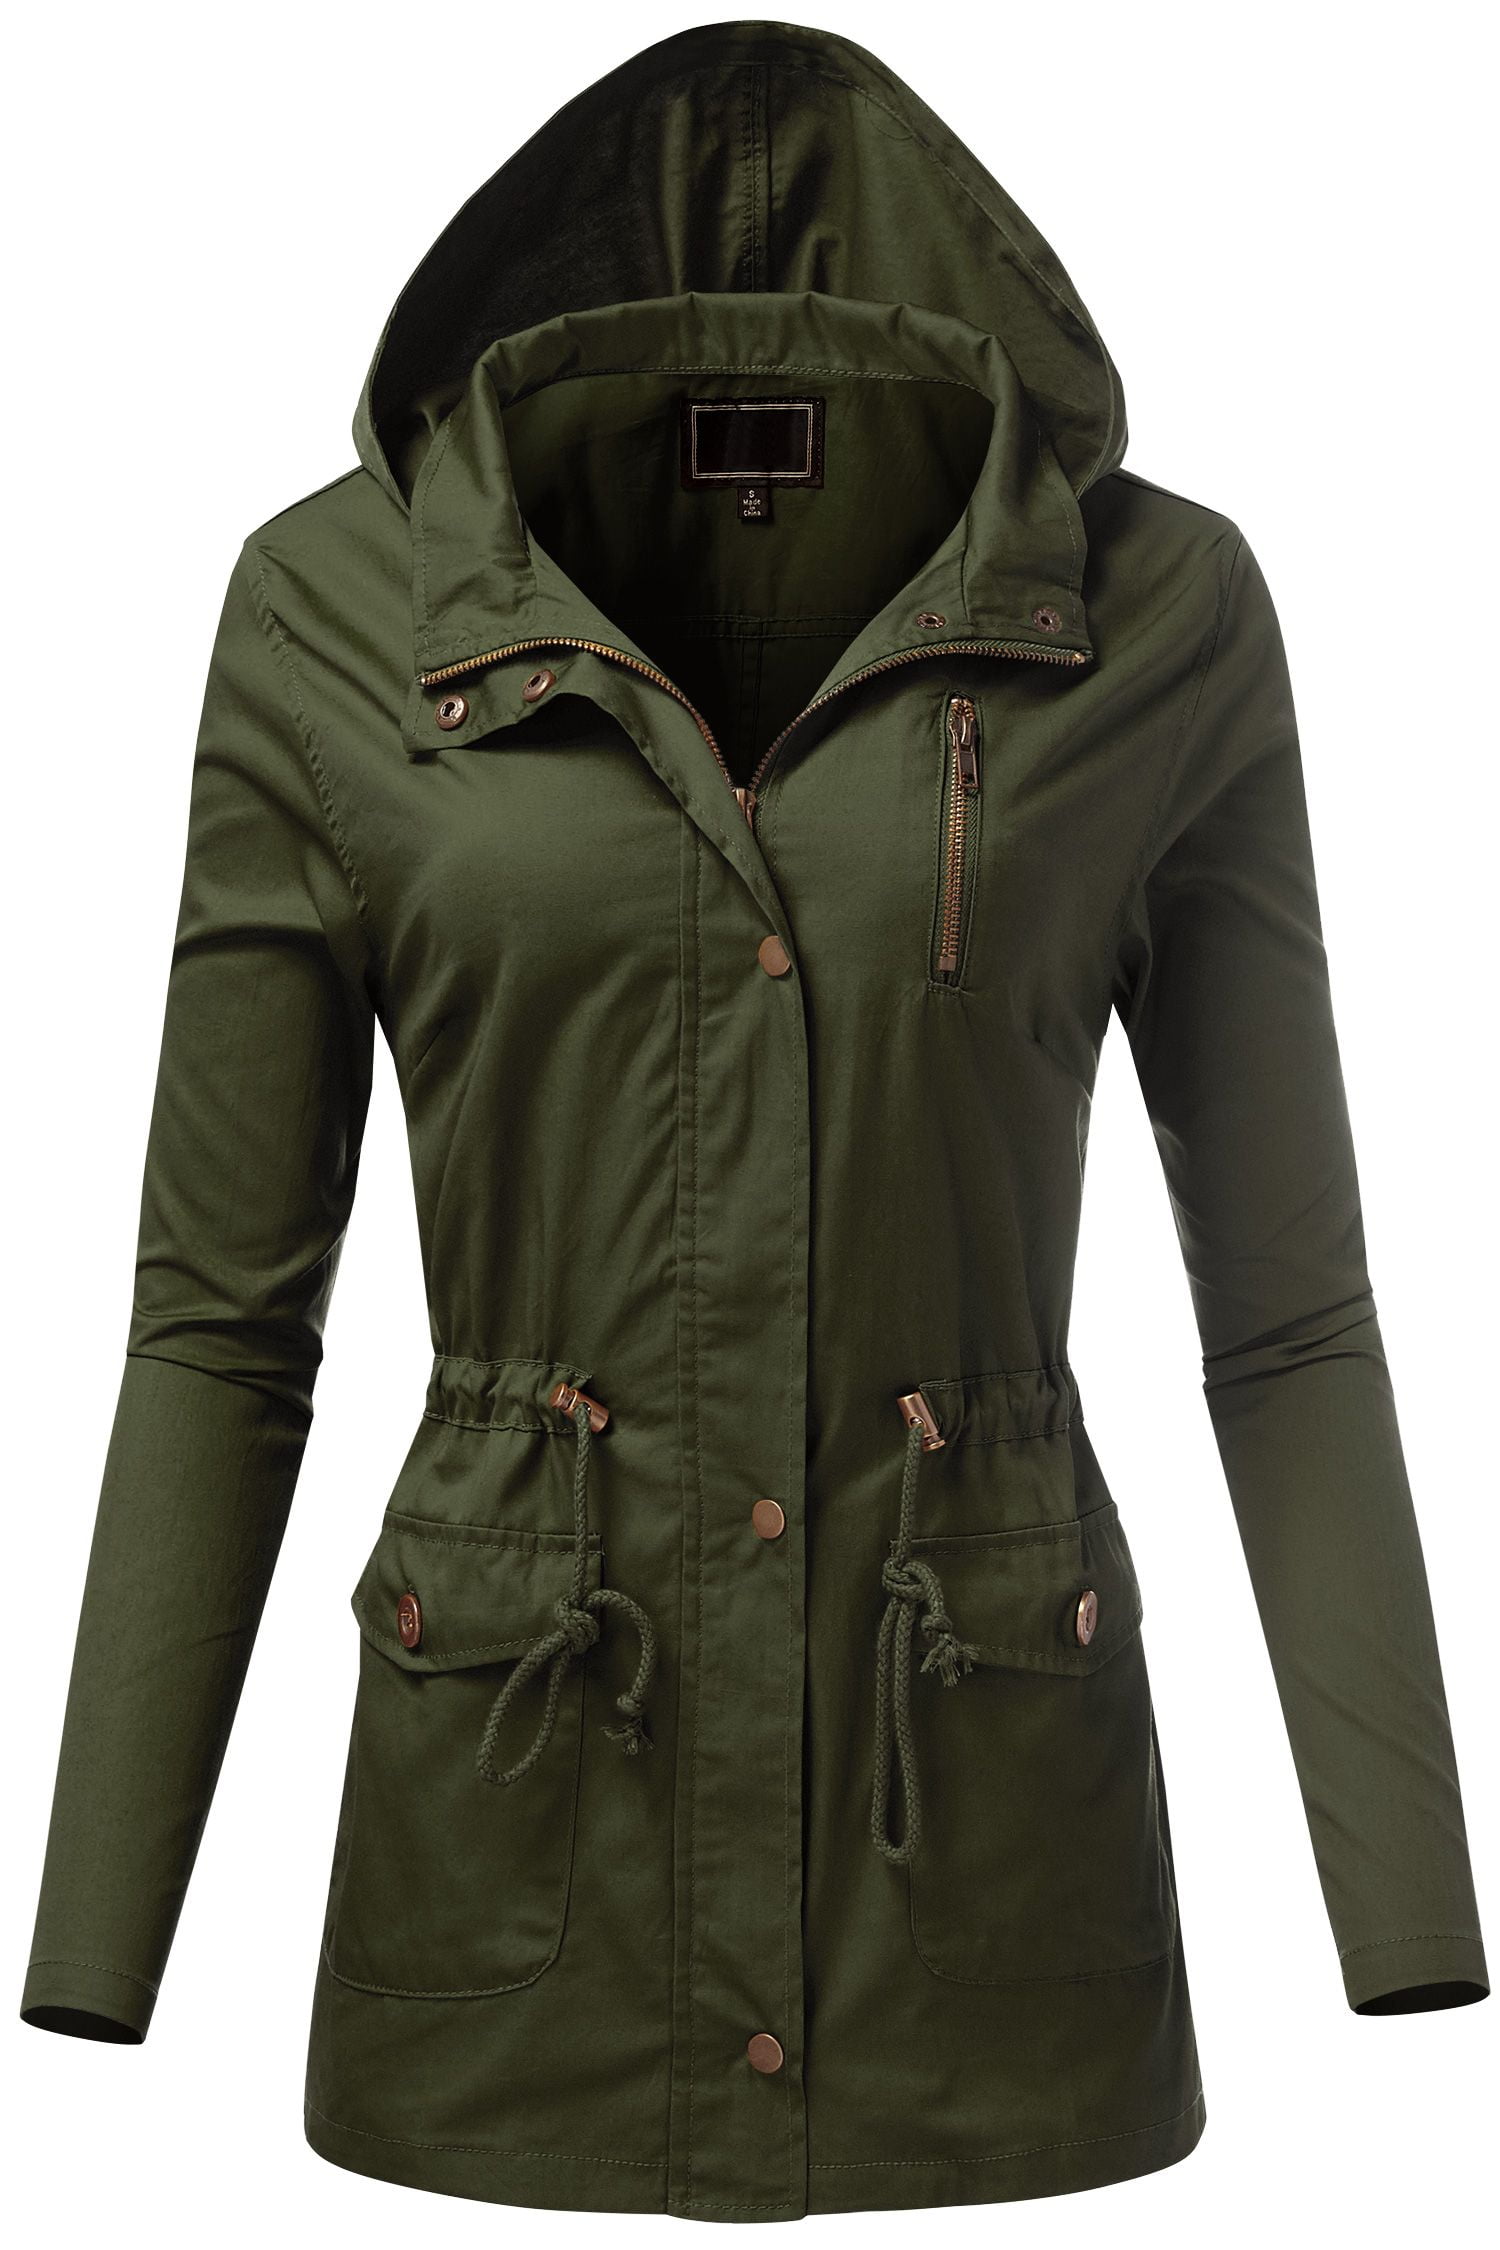 FashionMille Women Slim Fit Hooded Military Ultra Light-Weight Thin ...